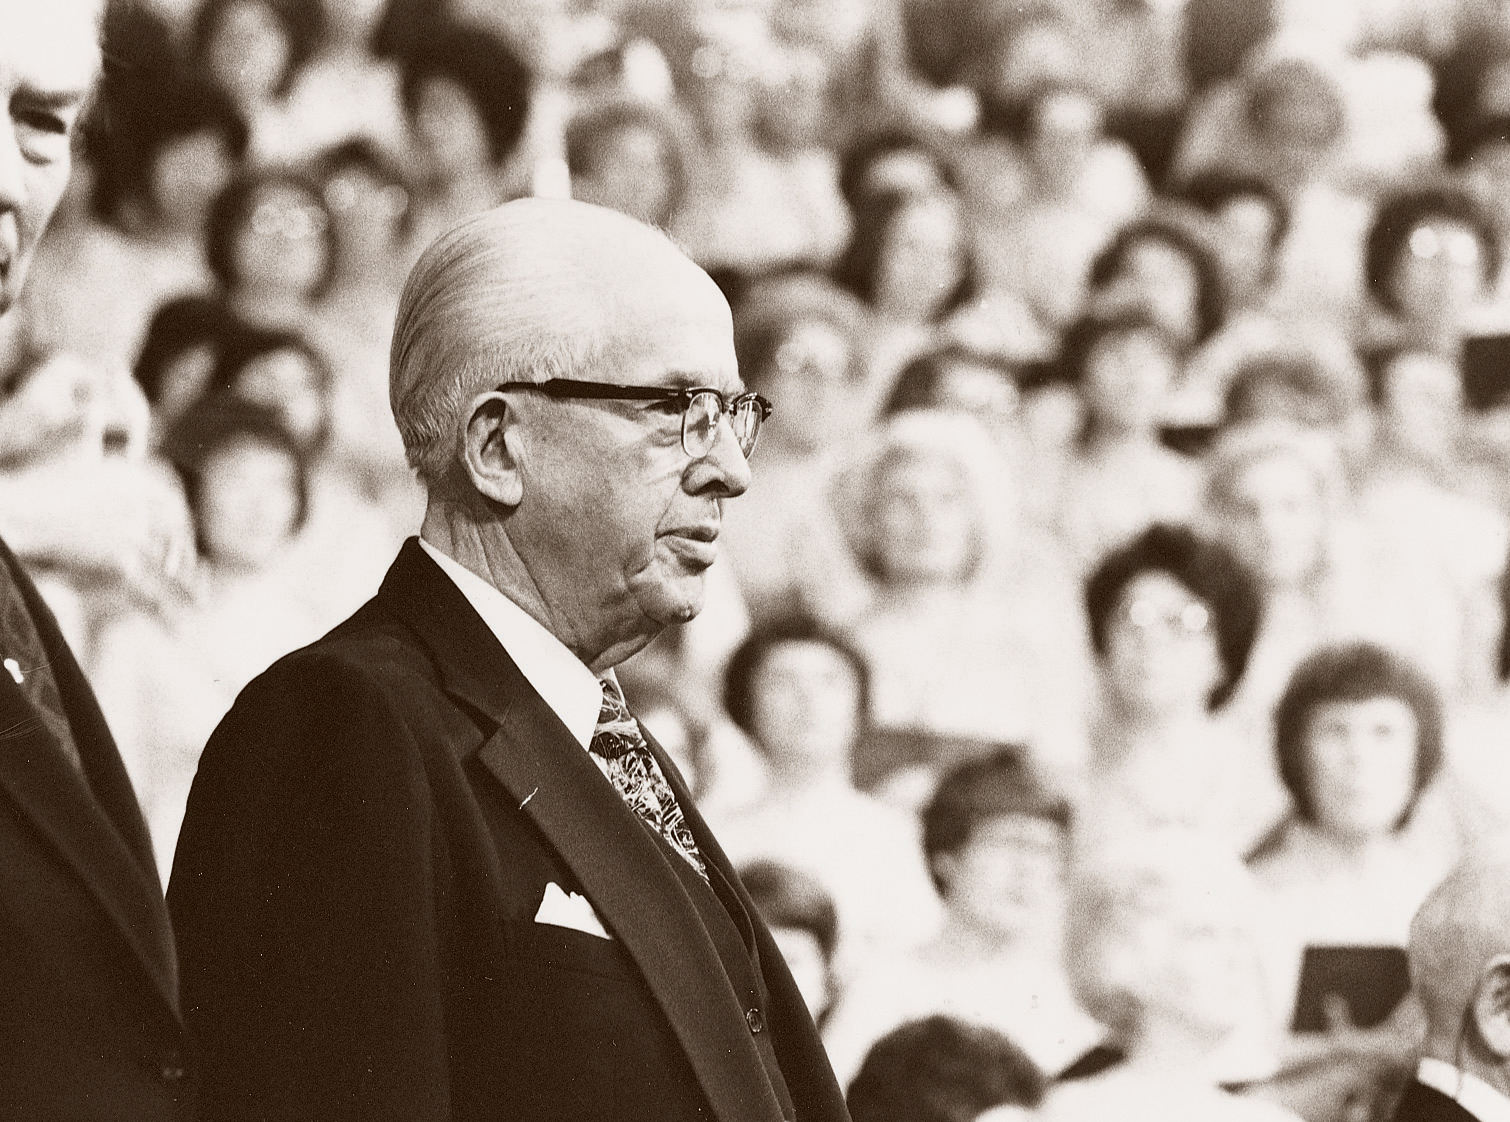 President Benson in a suit, a white shirt, and glasses, standing and speaking to the audience at general conference.